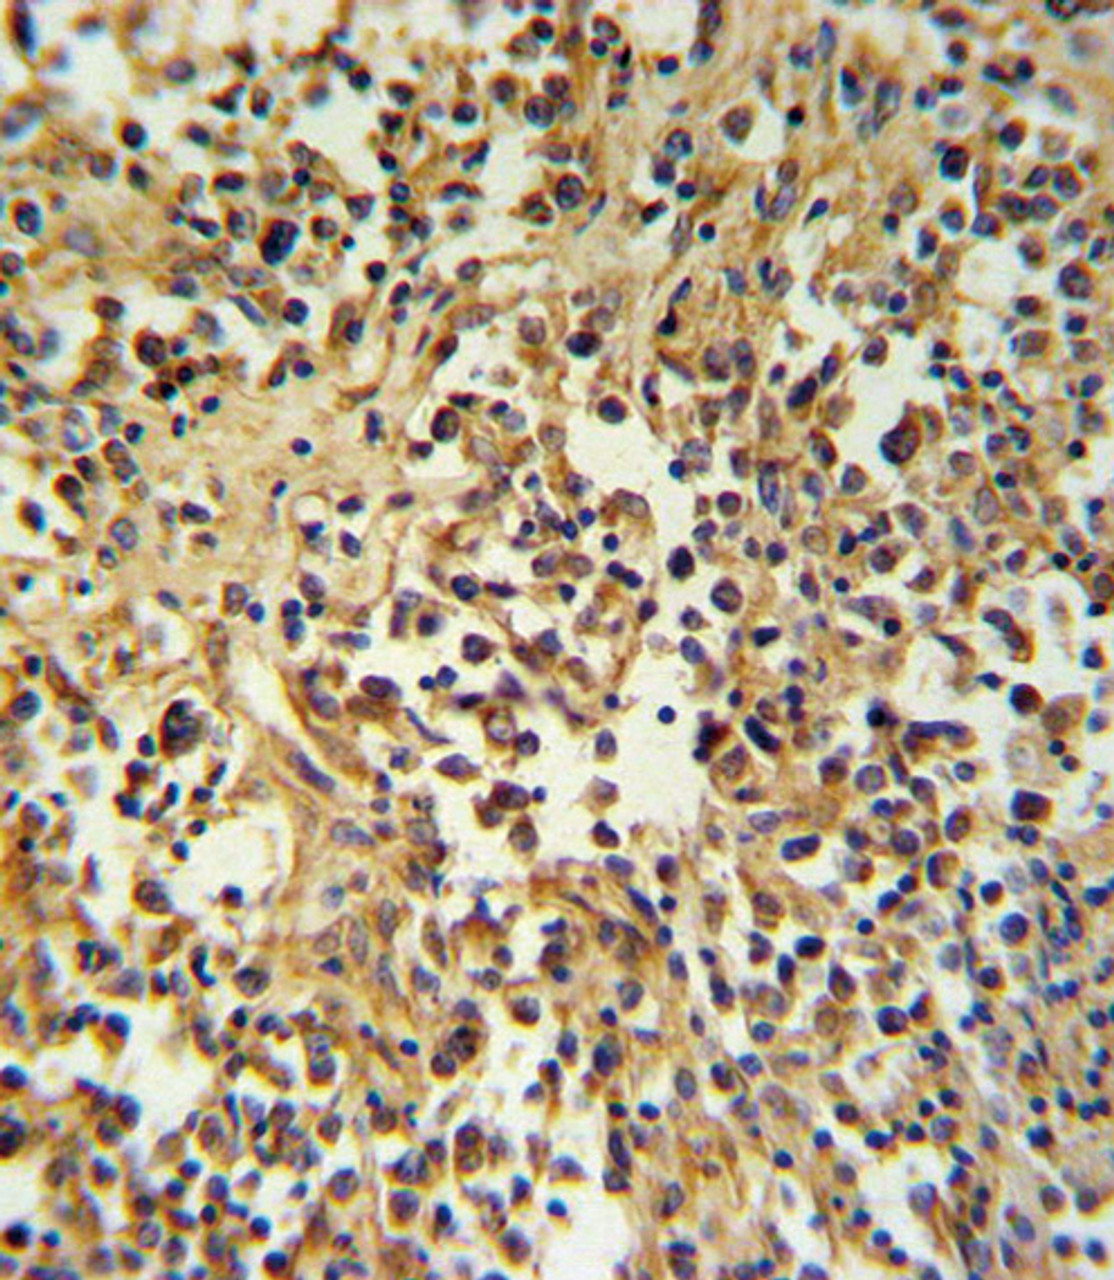 GZMM Antibody IHC analysis in formalin fixed and paraffin embedded human lymph tissue followed by peroxidase conjugation of the secondary antibody and DAB staining.